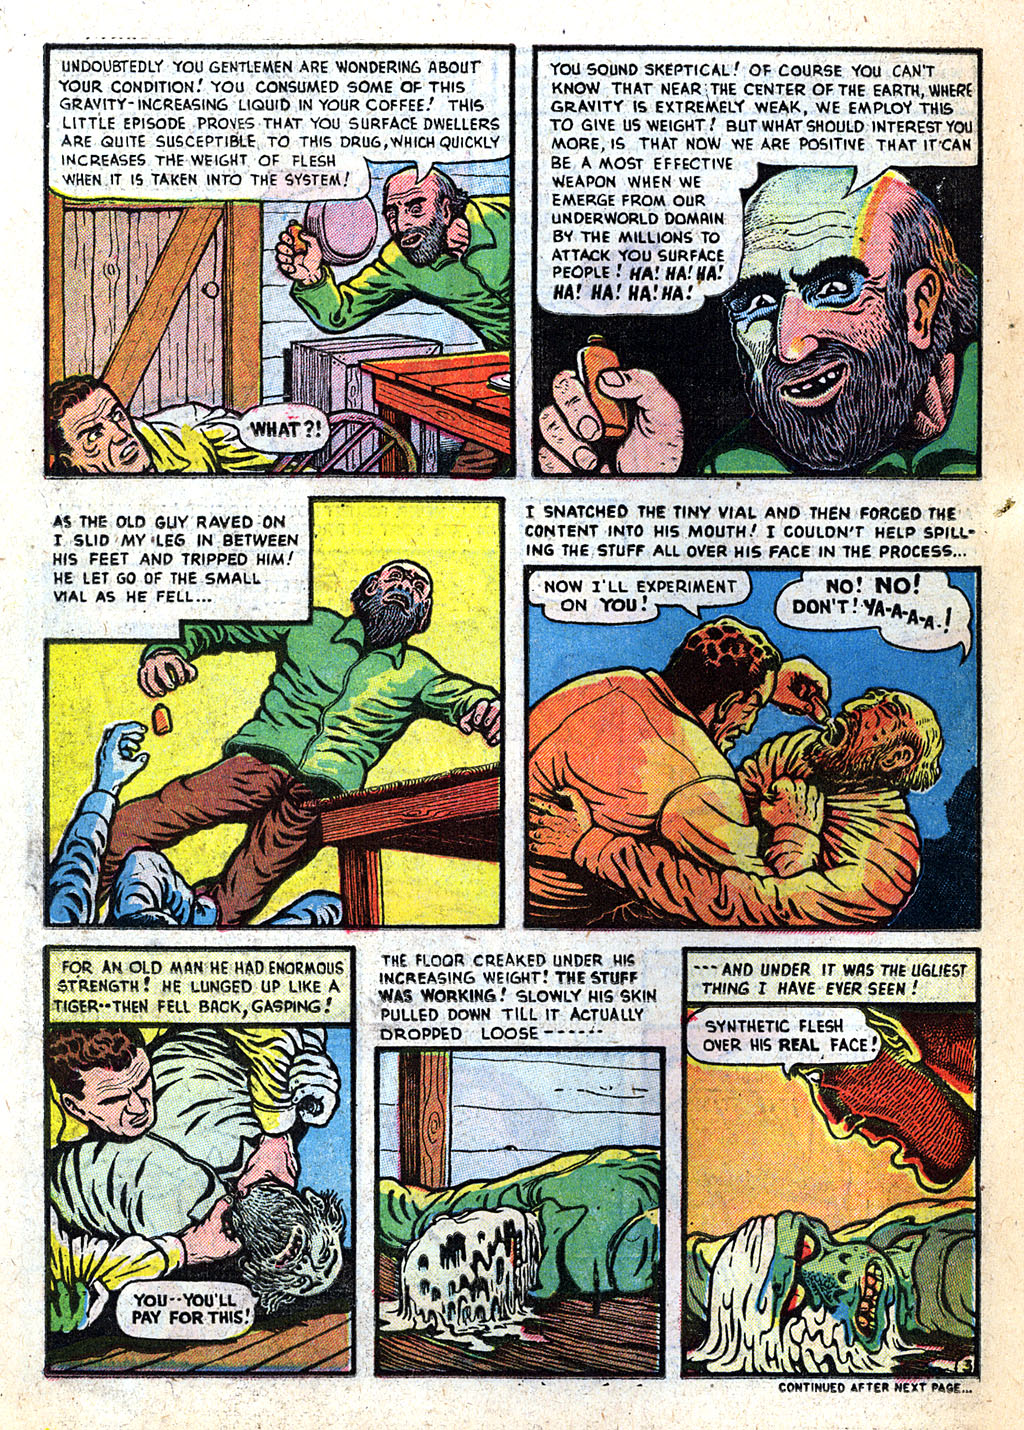 Marvel Tales (1949) 104 Page 13